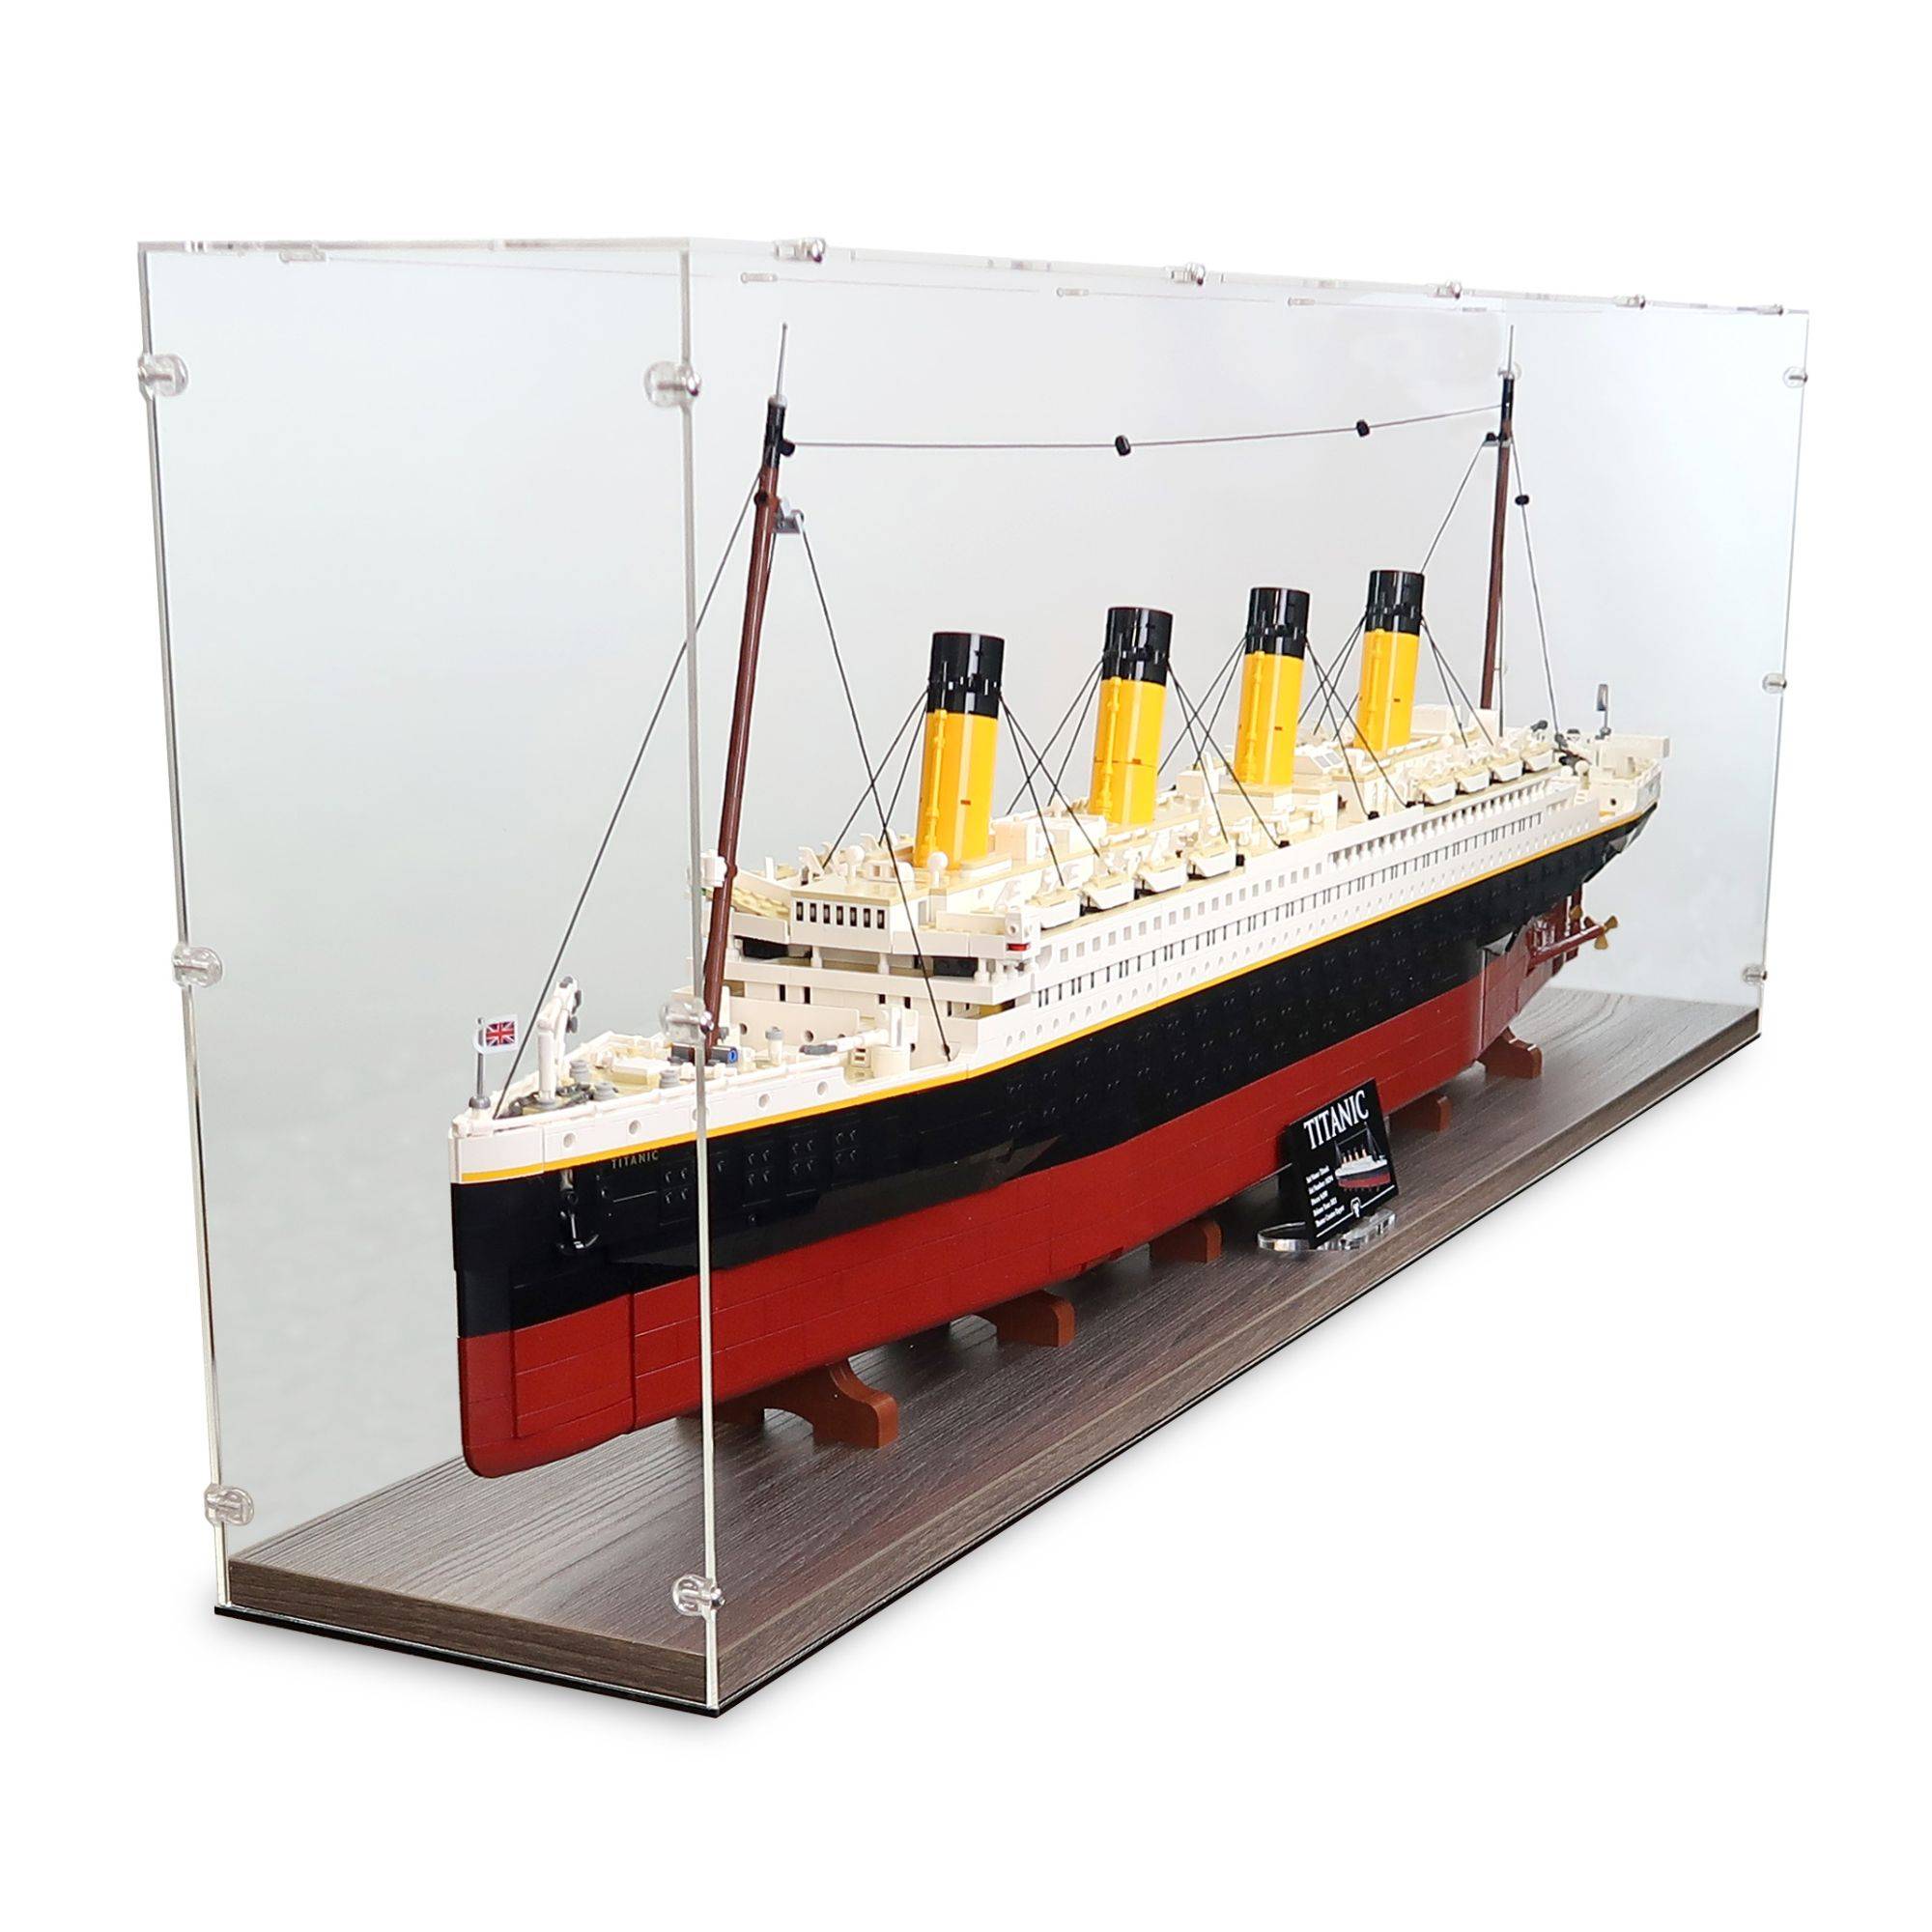 Acrylic Displays for your Lego Models Lego 10294 Titanic Display Case